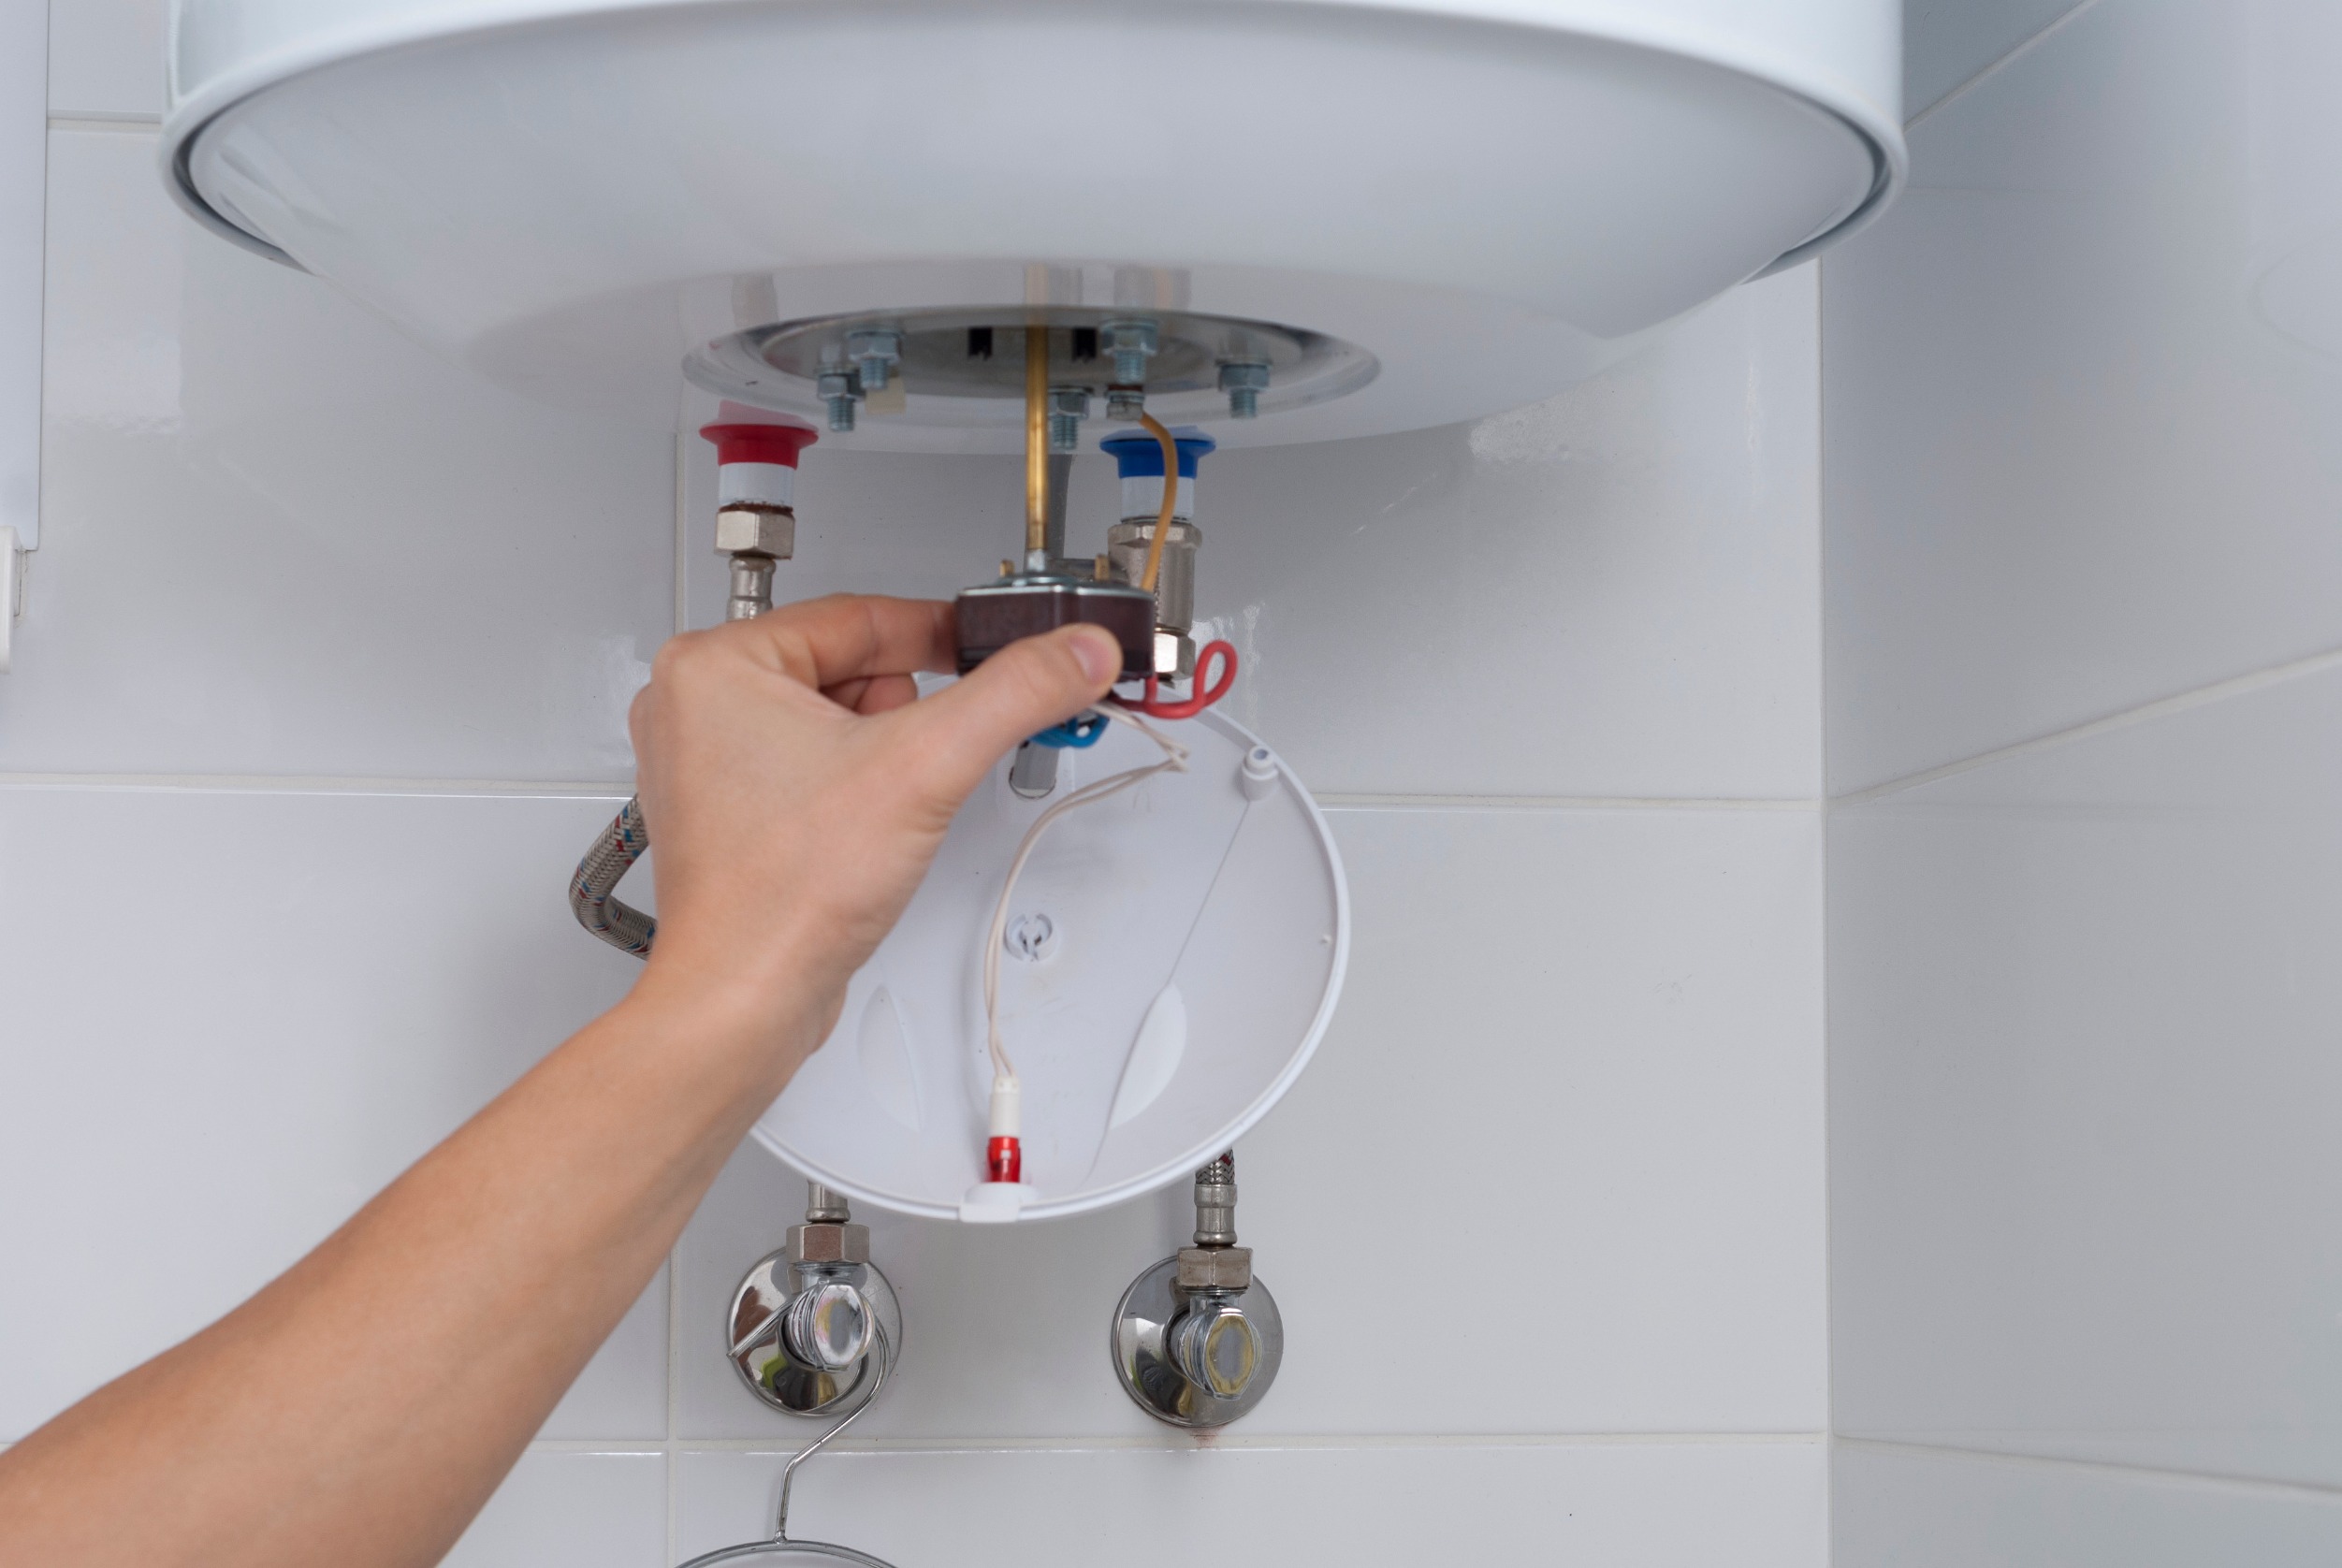 Person adjusting the settings on an electric water heater, with a focus on the internal wiring and plumbing connections, including hot and cold water valves and electrical components